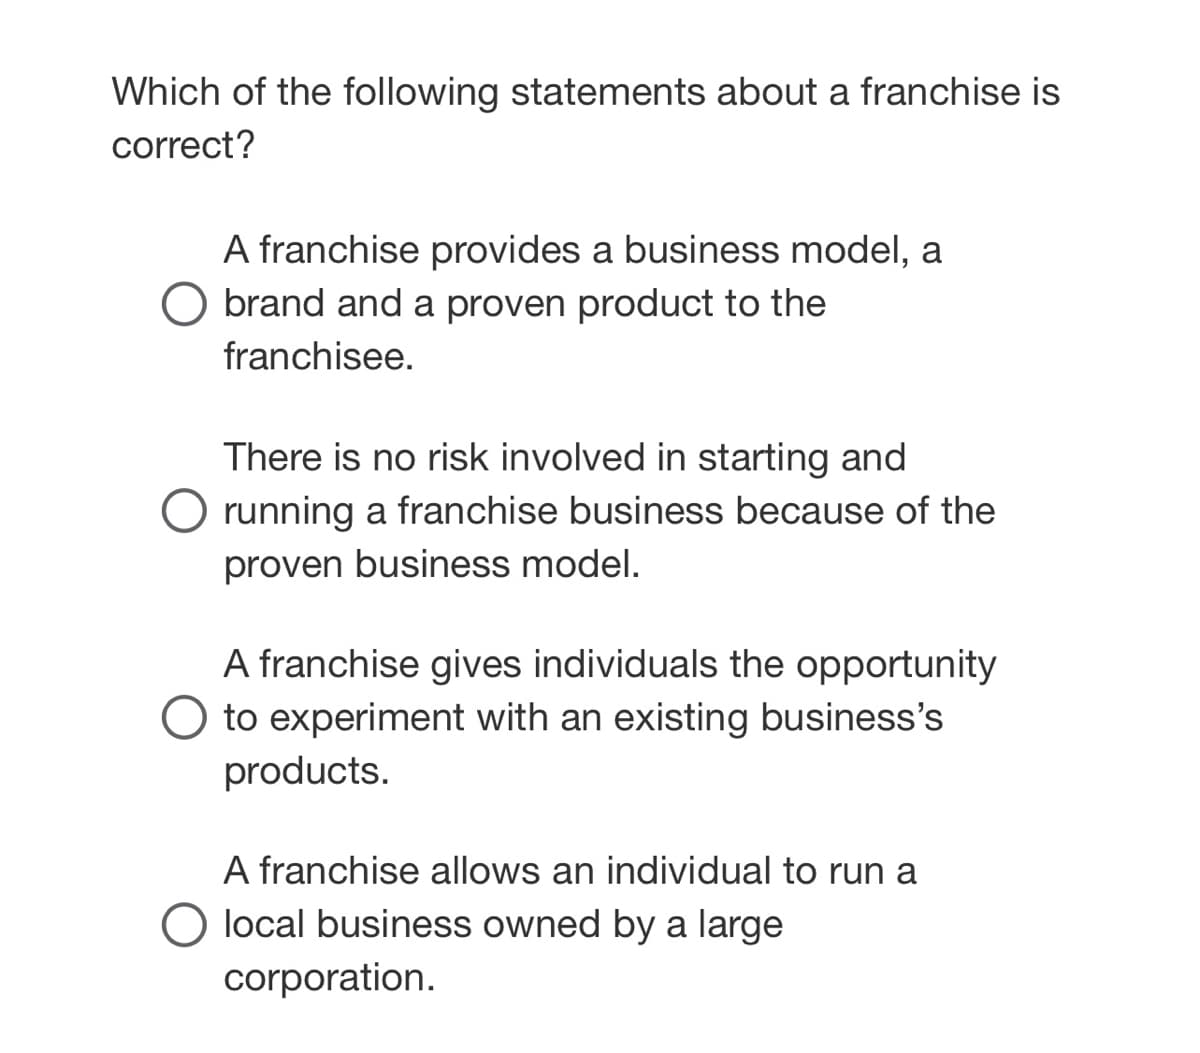 Which of the following statements about a franchise is
correct?
A franchise provides a business model, a
brand and a proven product to the
franchisee.
There is no risk involved in starting and
running a franchise business because of the
proven business model.
A franchise gives individuals the opportunity
O to experiment with an existing business's
products.
A franchise allows an individual to run a
O local business owned by a large
corporation.